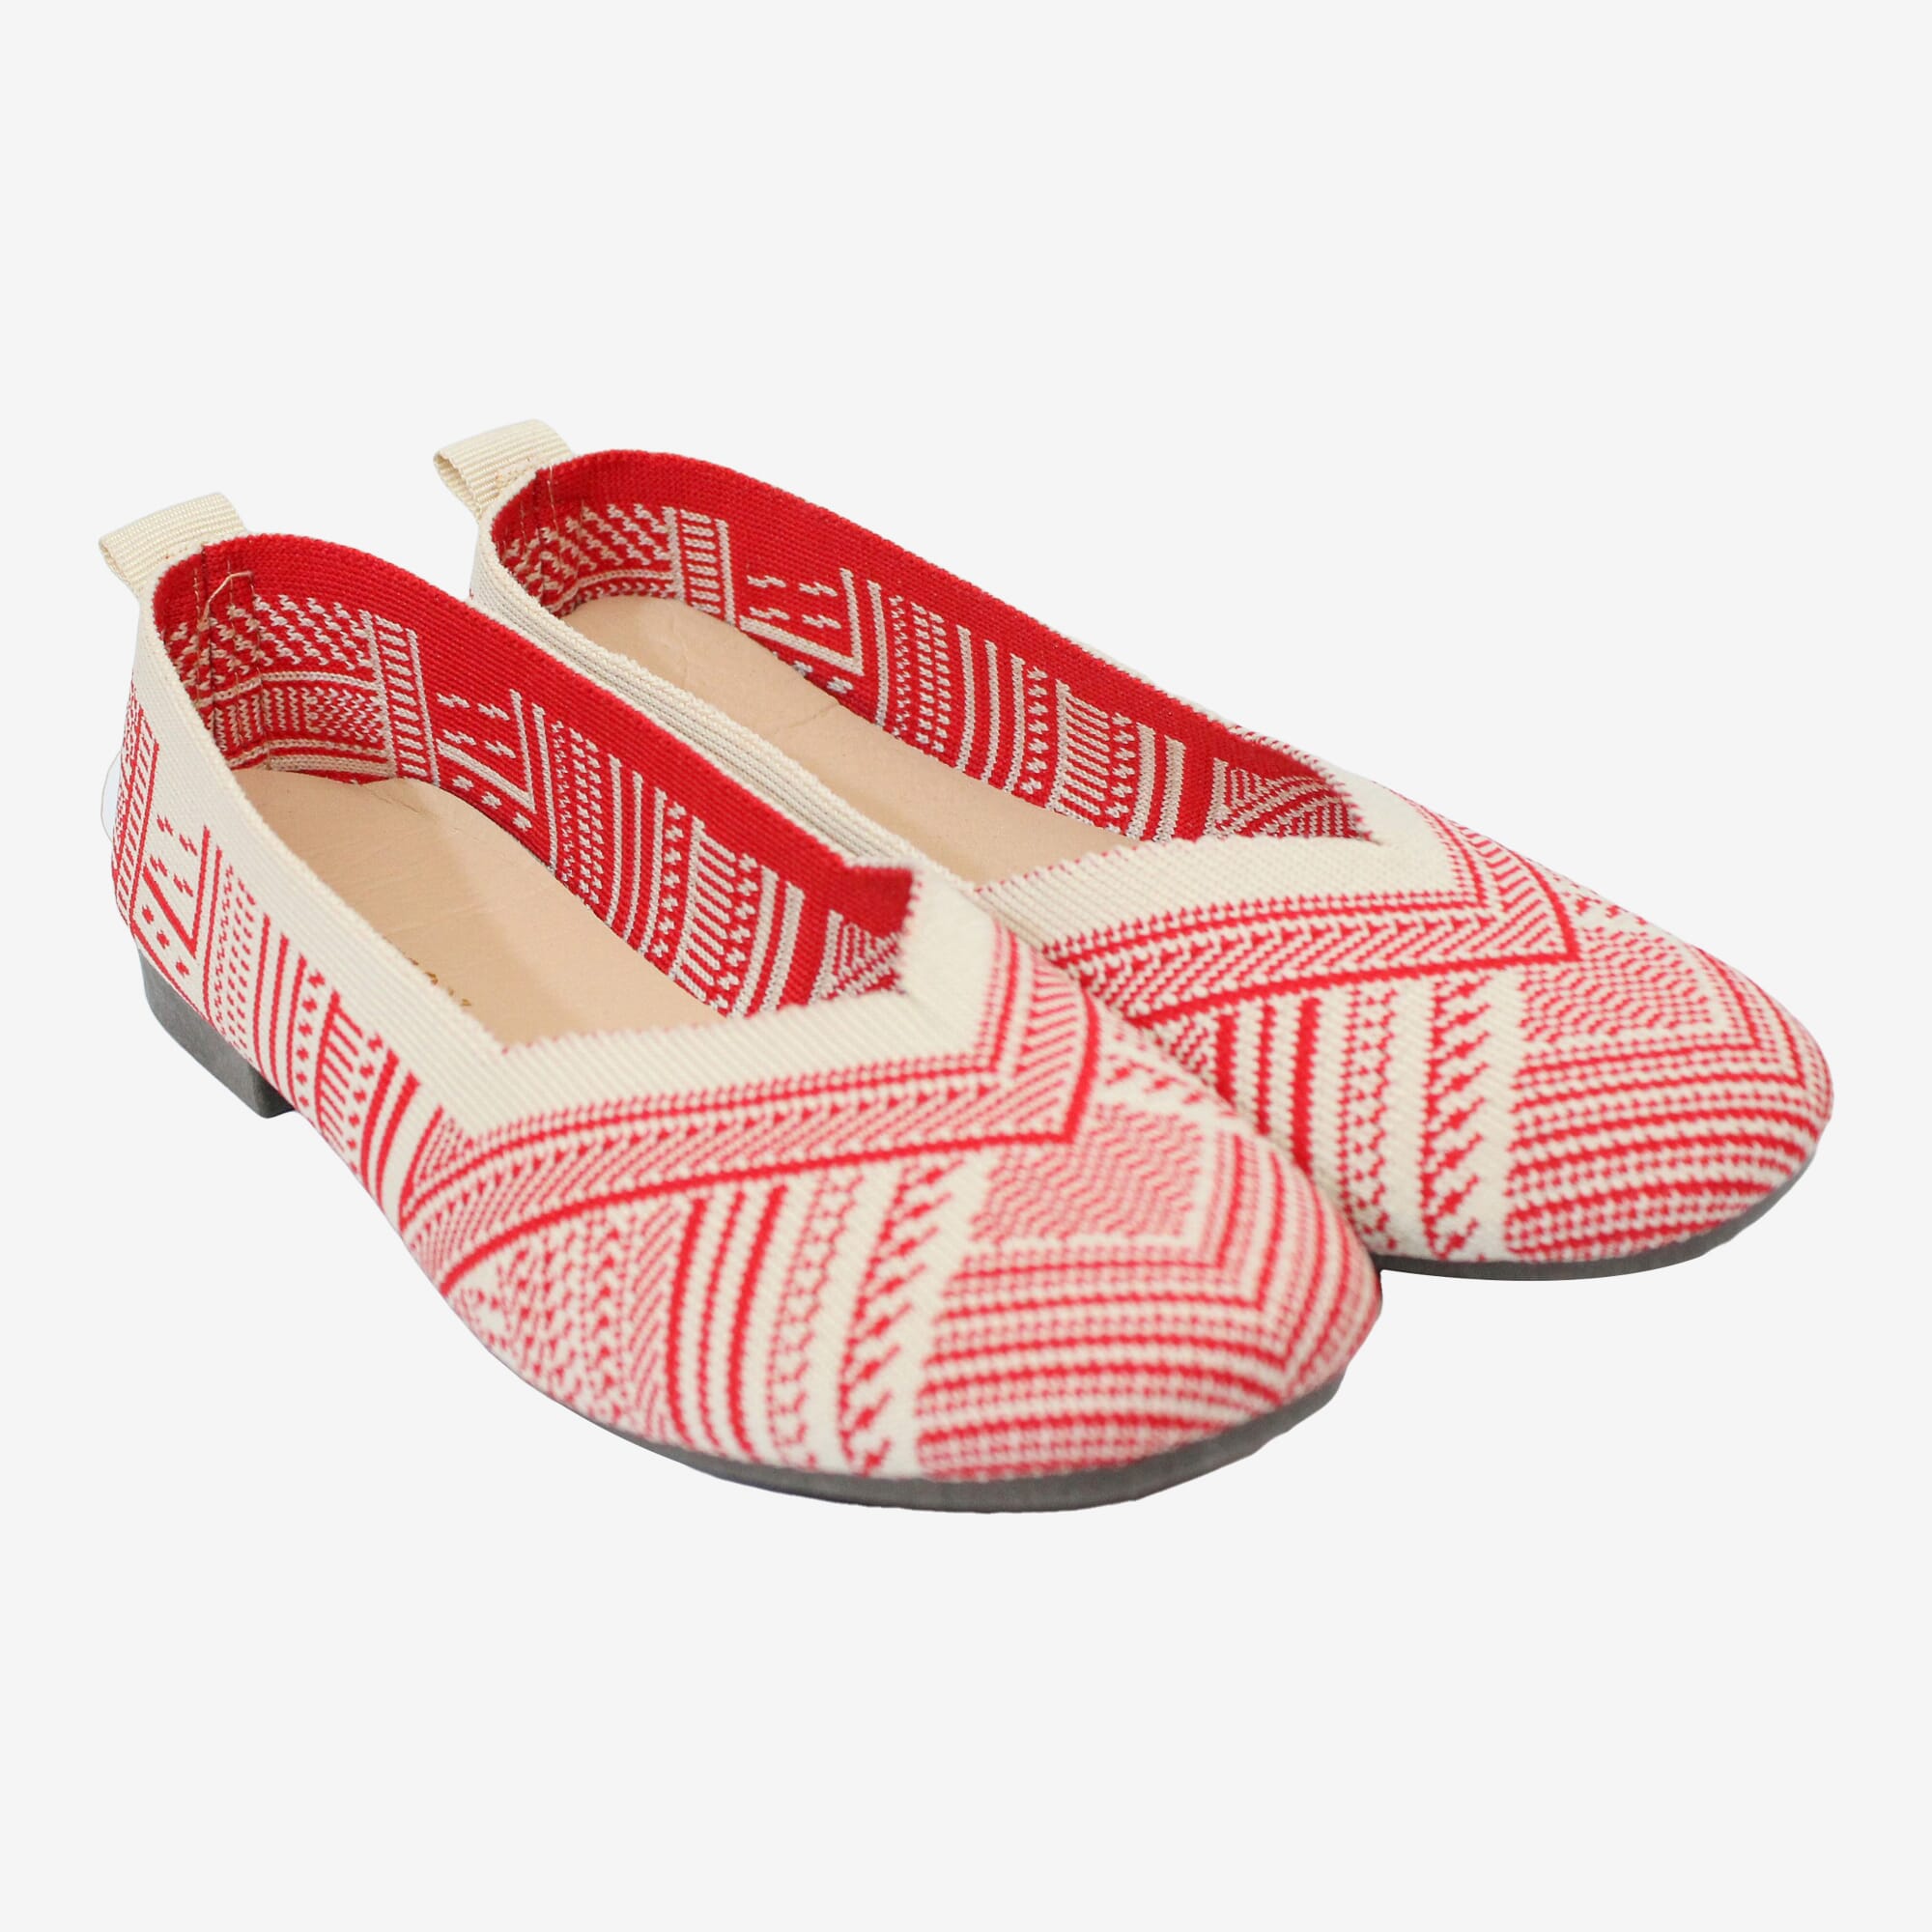 Ladies Flat Shoes Price in Nepal - Buy Flat Shoes For Women Online -  